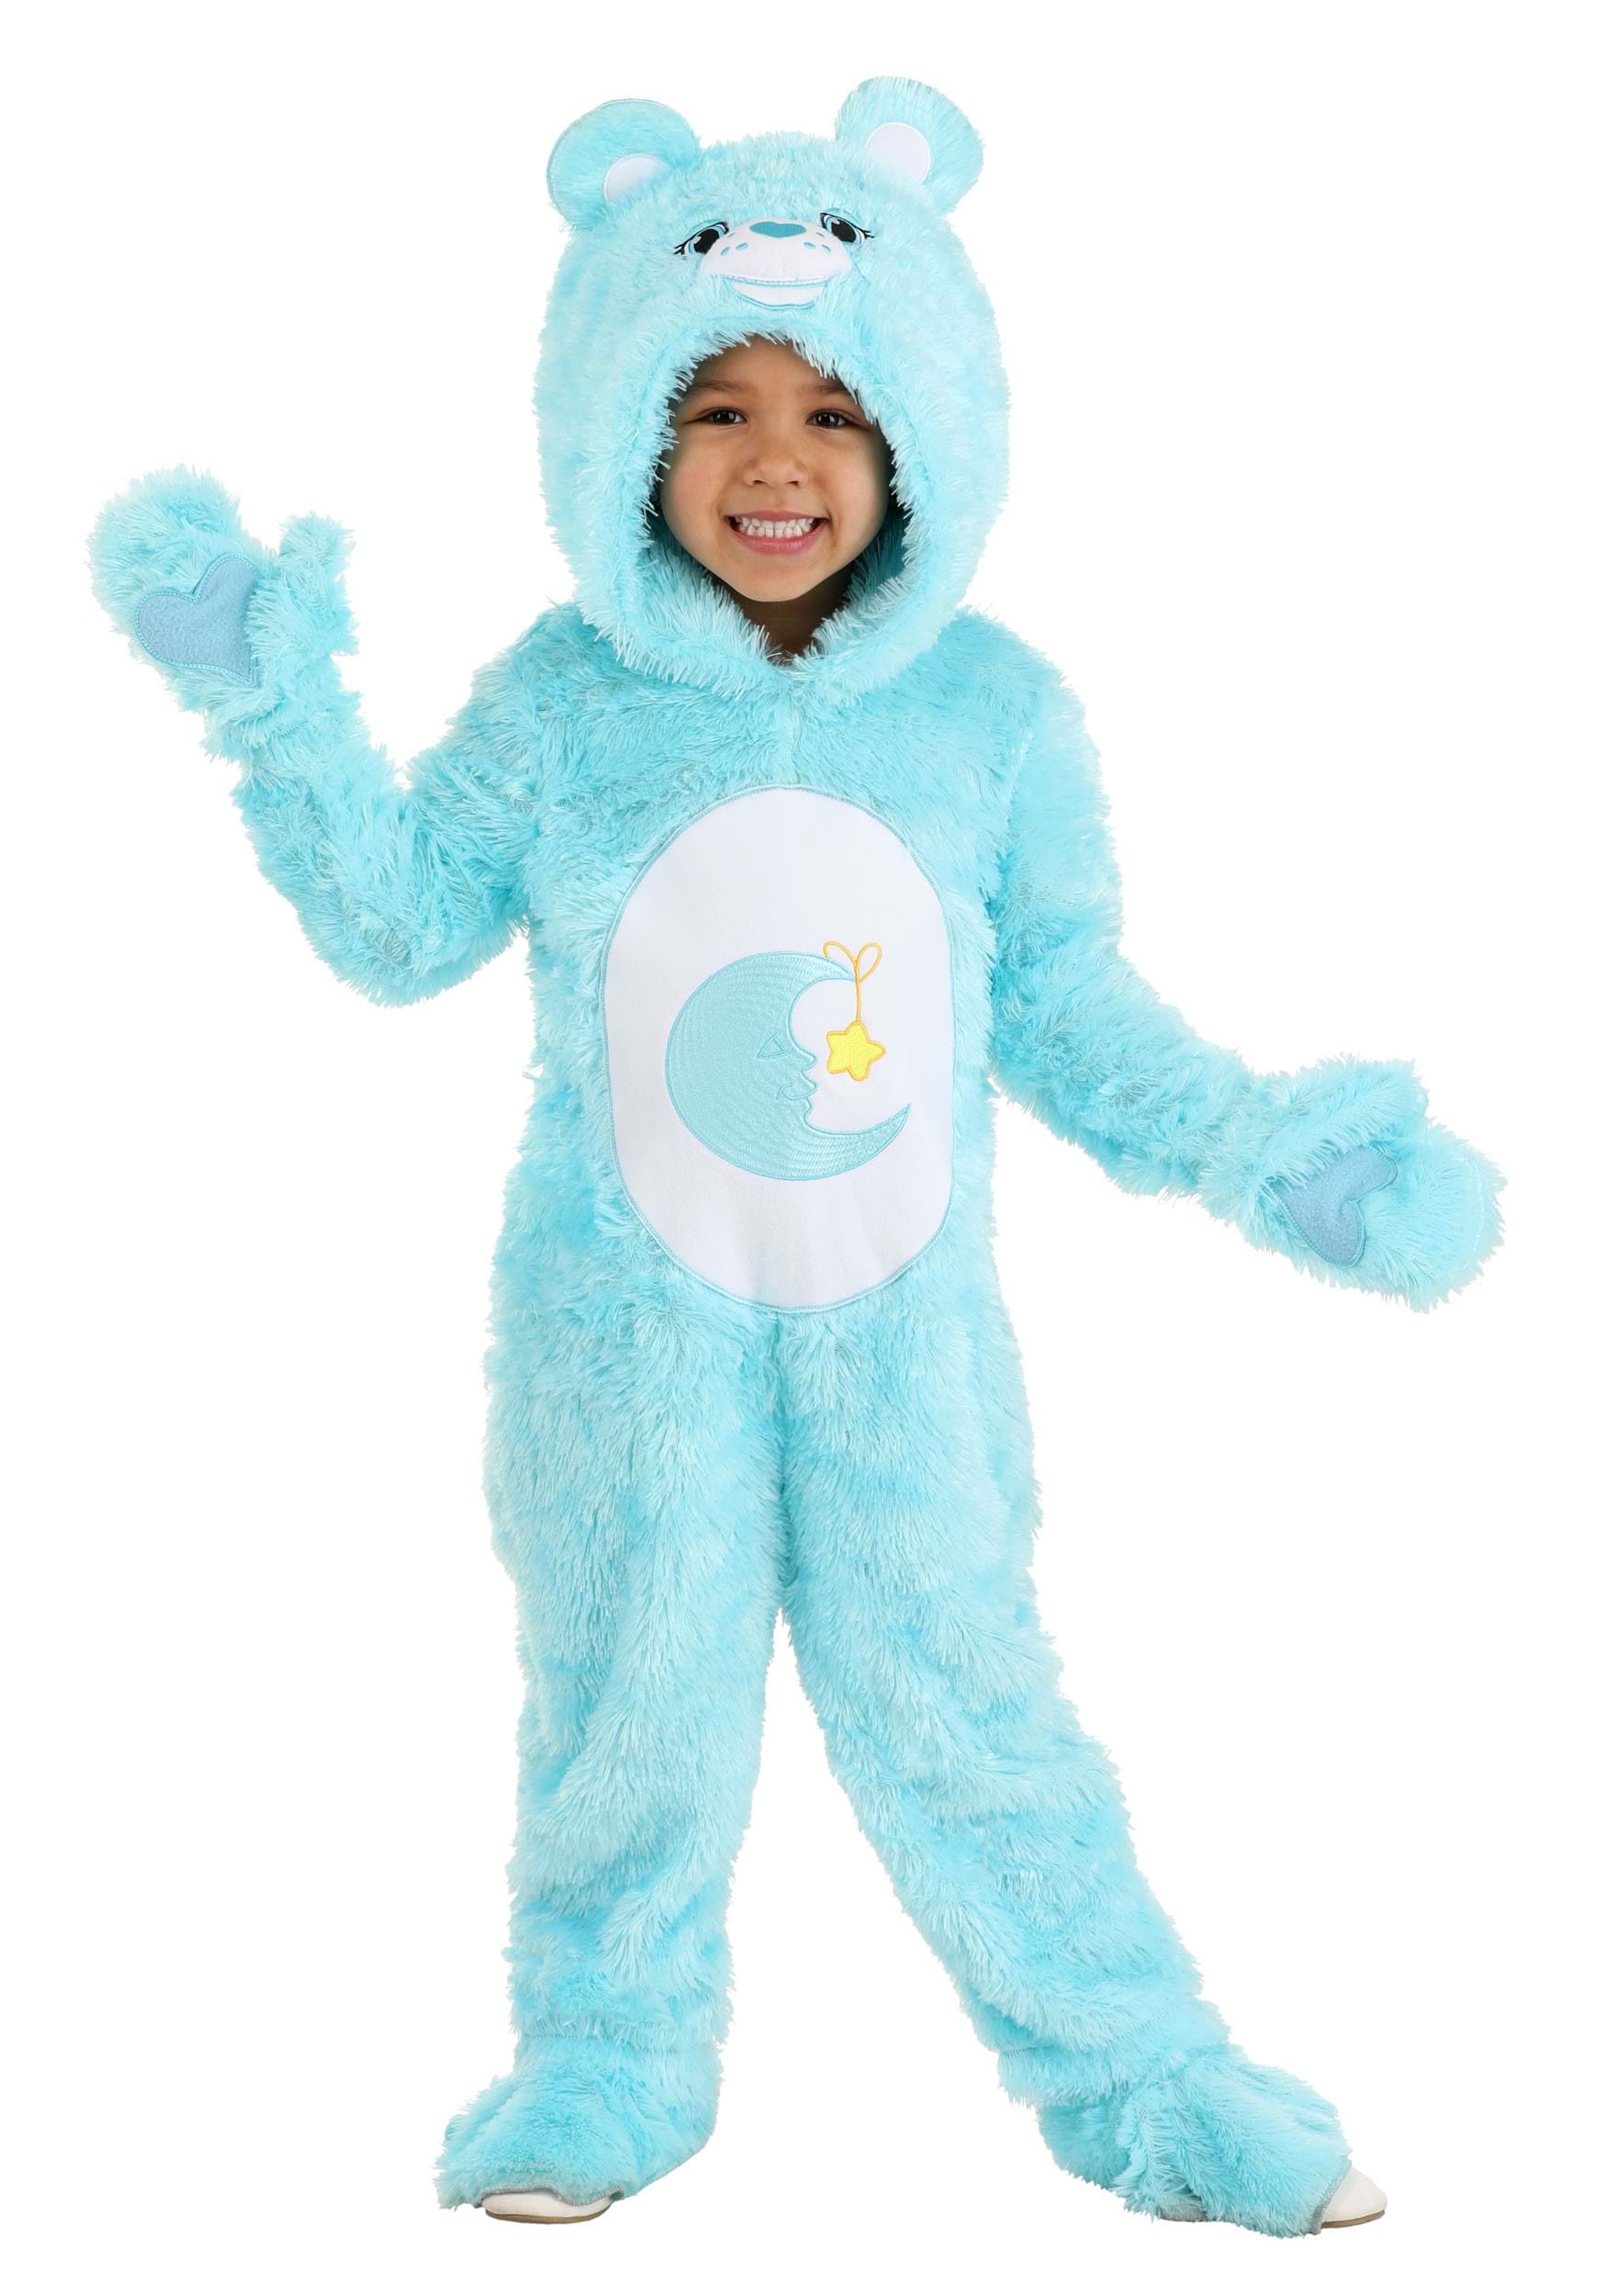 Photos - Fancy Dress Toddler FUN Costumes  Care Bears Classic Bedtime Bear Costume Blue/Whit 